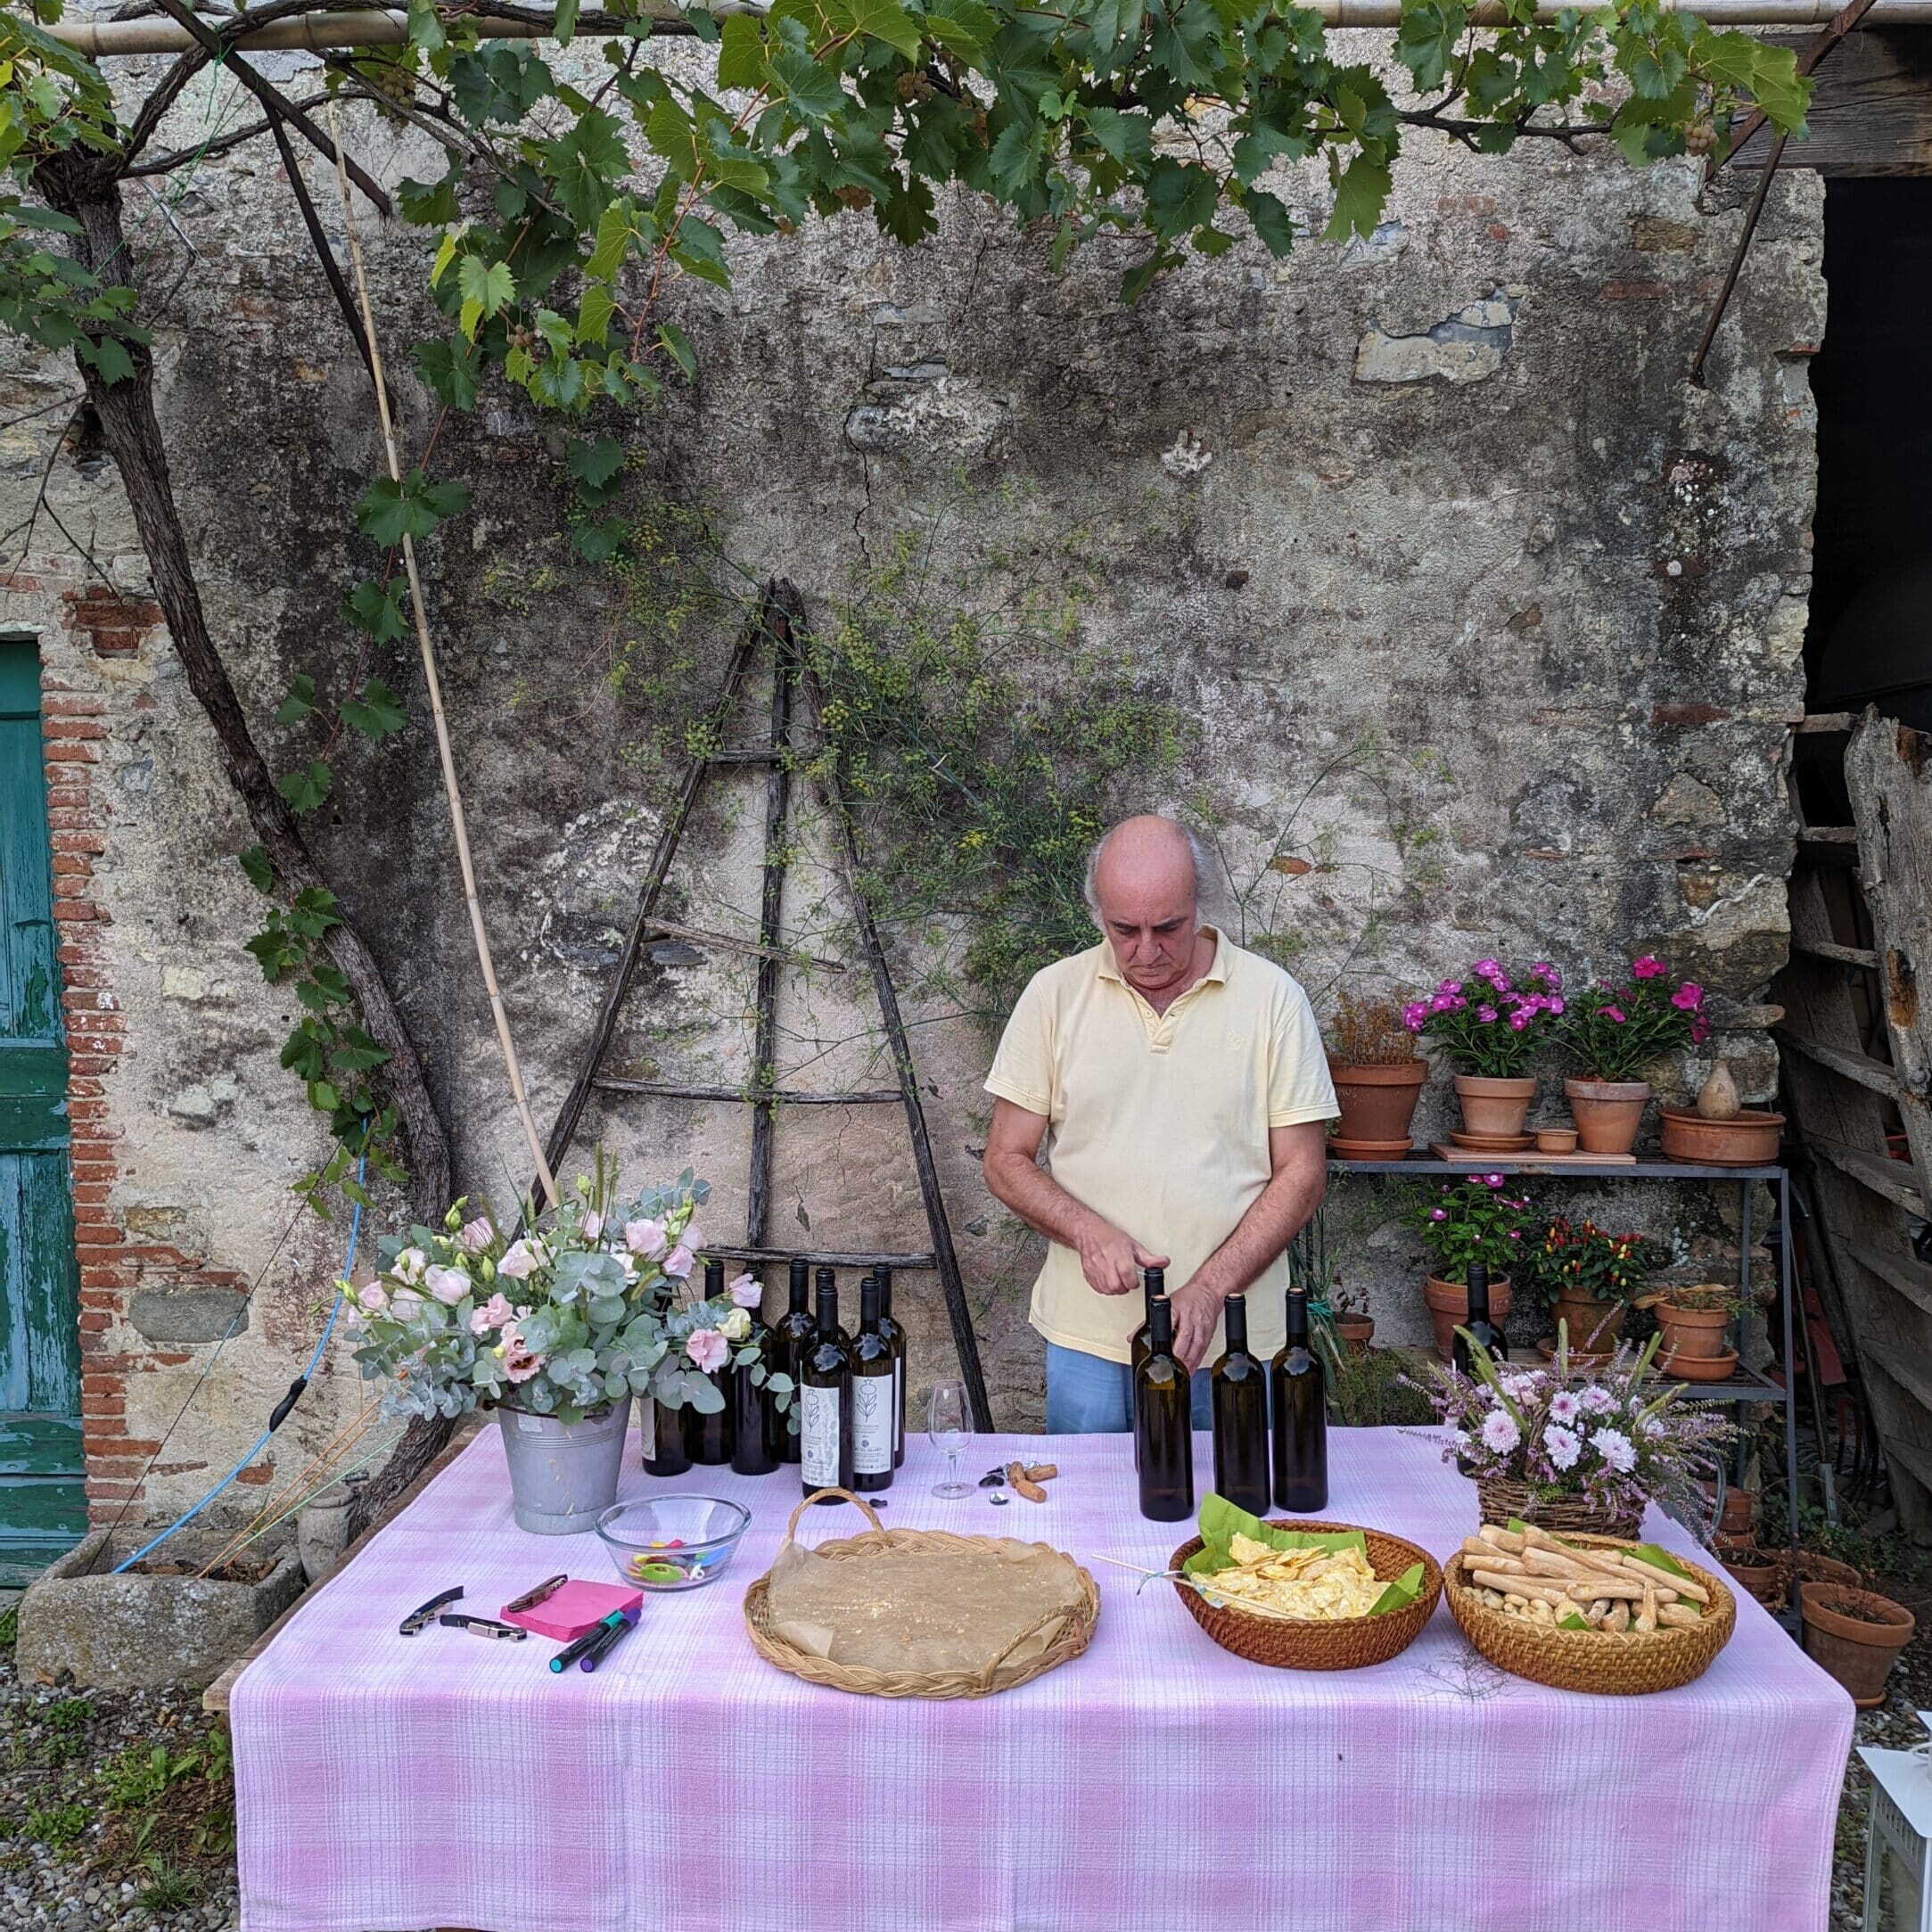 The owner of the vineyard opens and prepares the wine bottles for the tasting